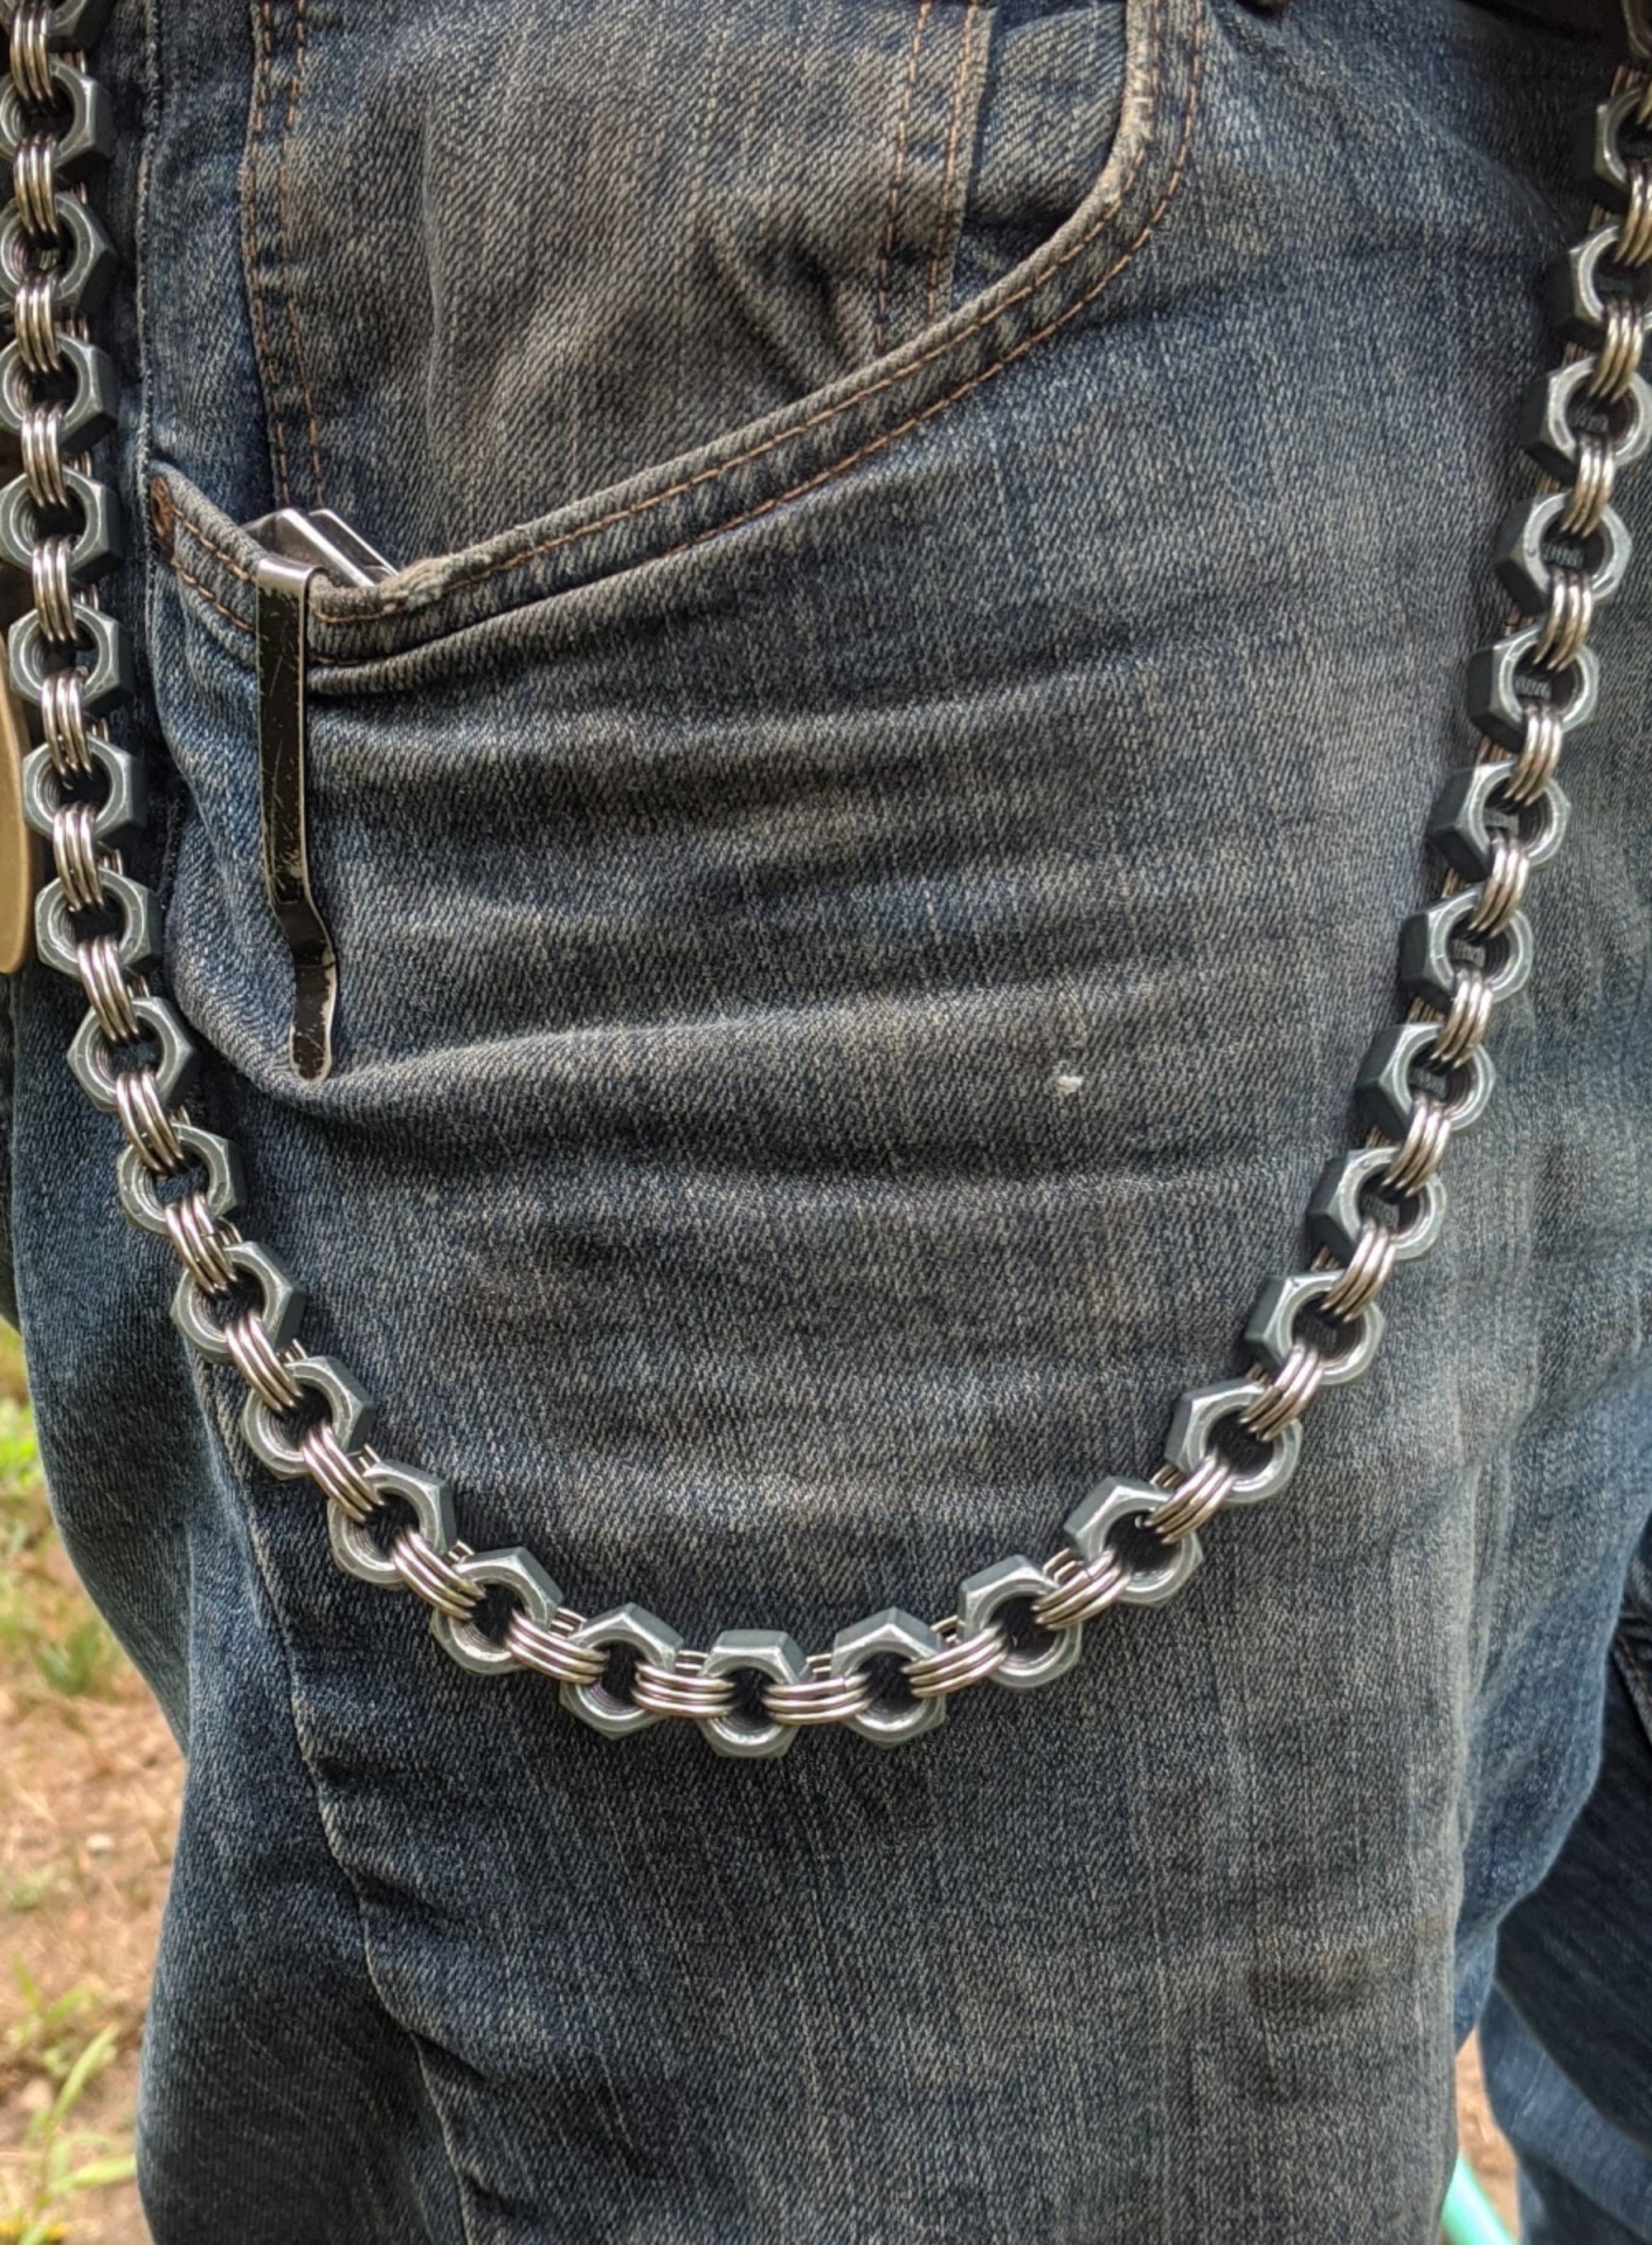 Biker Wallet Chains  Truckers Wallets Replacement Chains